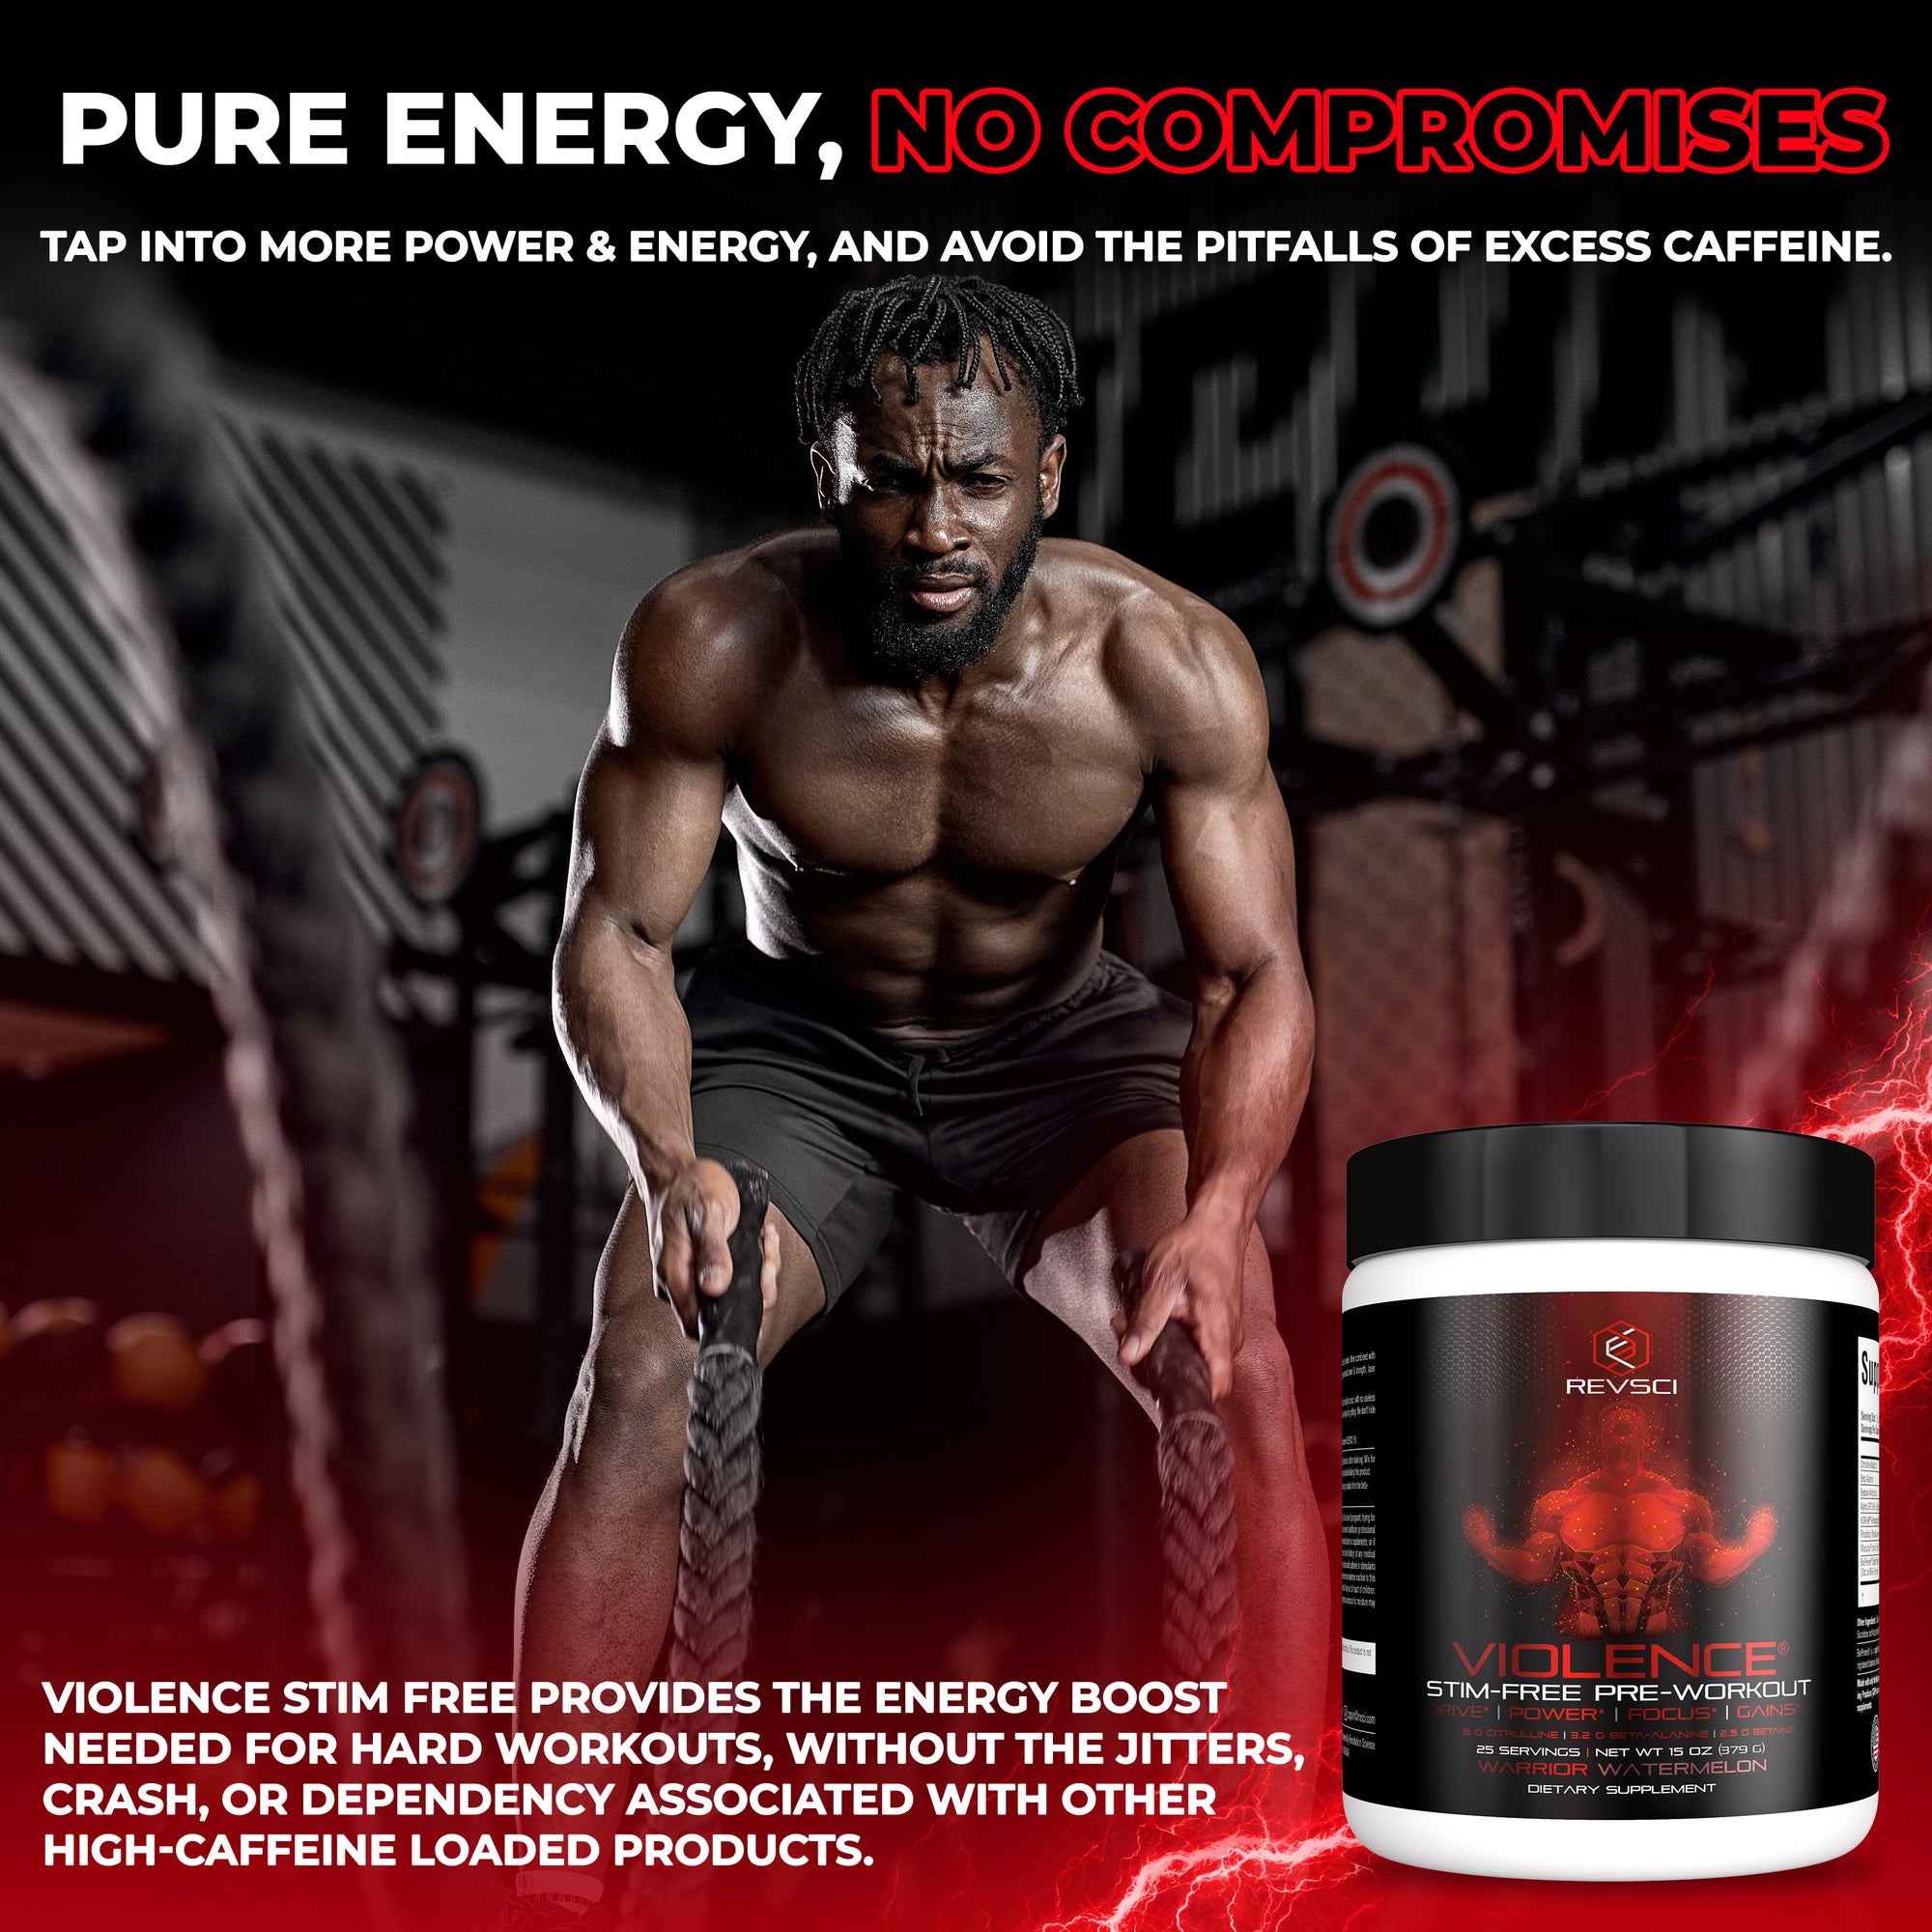 Stimulant Free Pre Workout Boosts: Unleash Natural Energy!